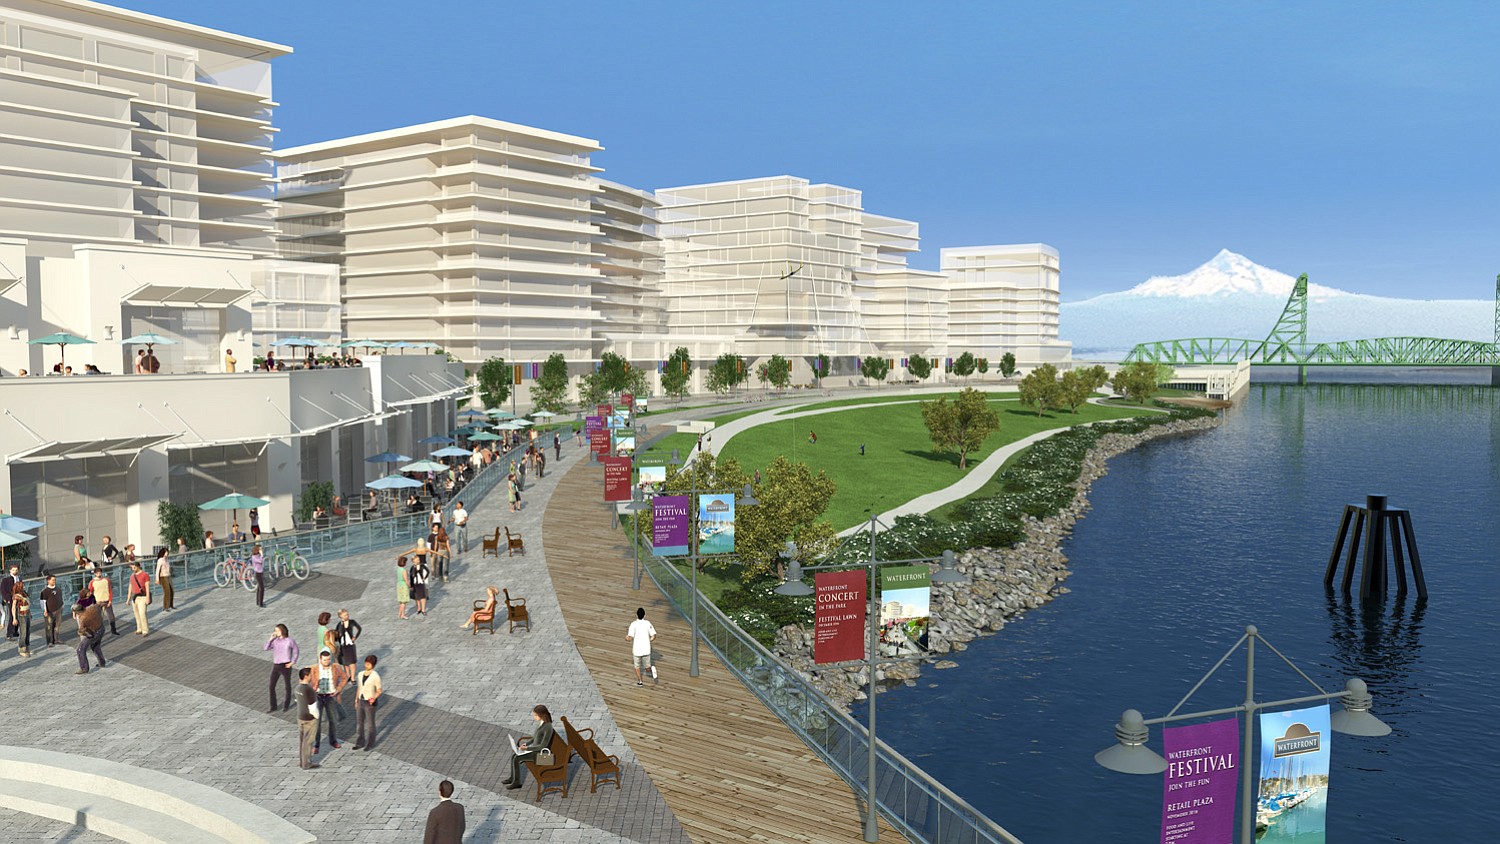 A rendition of the development plan for Vancouver's waterfront.